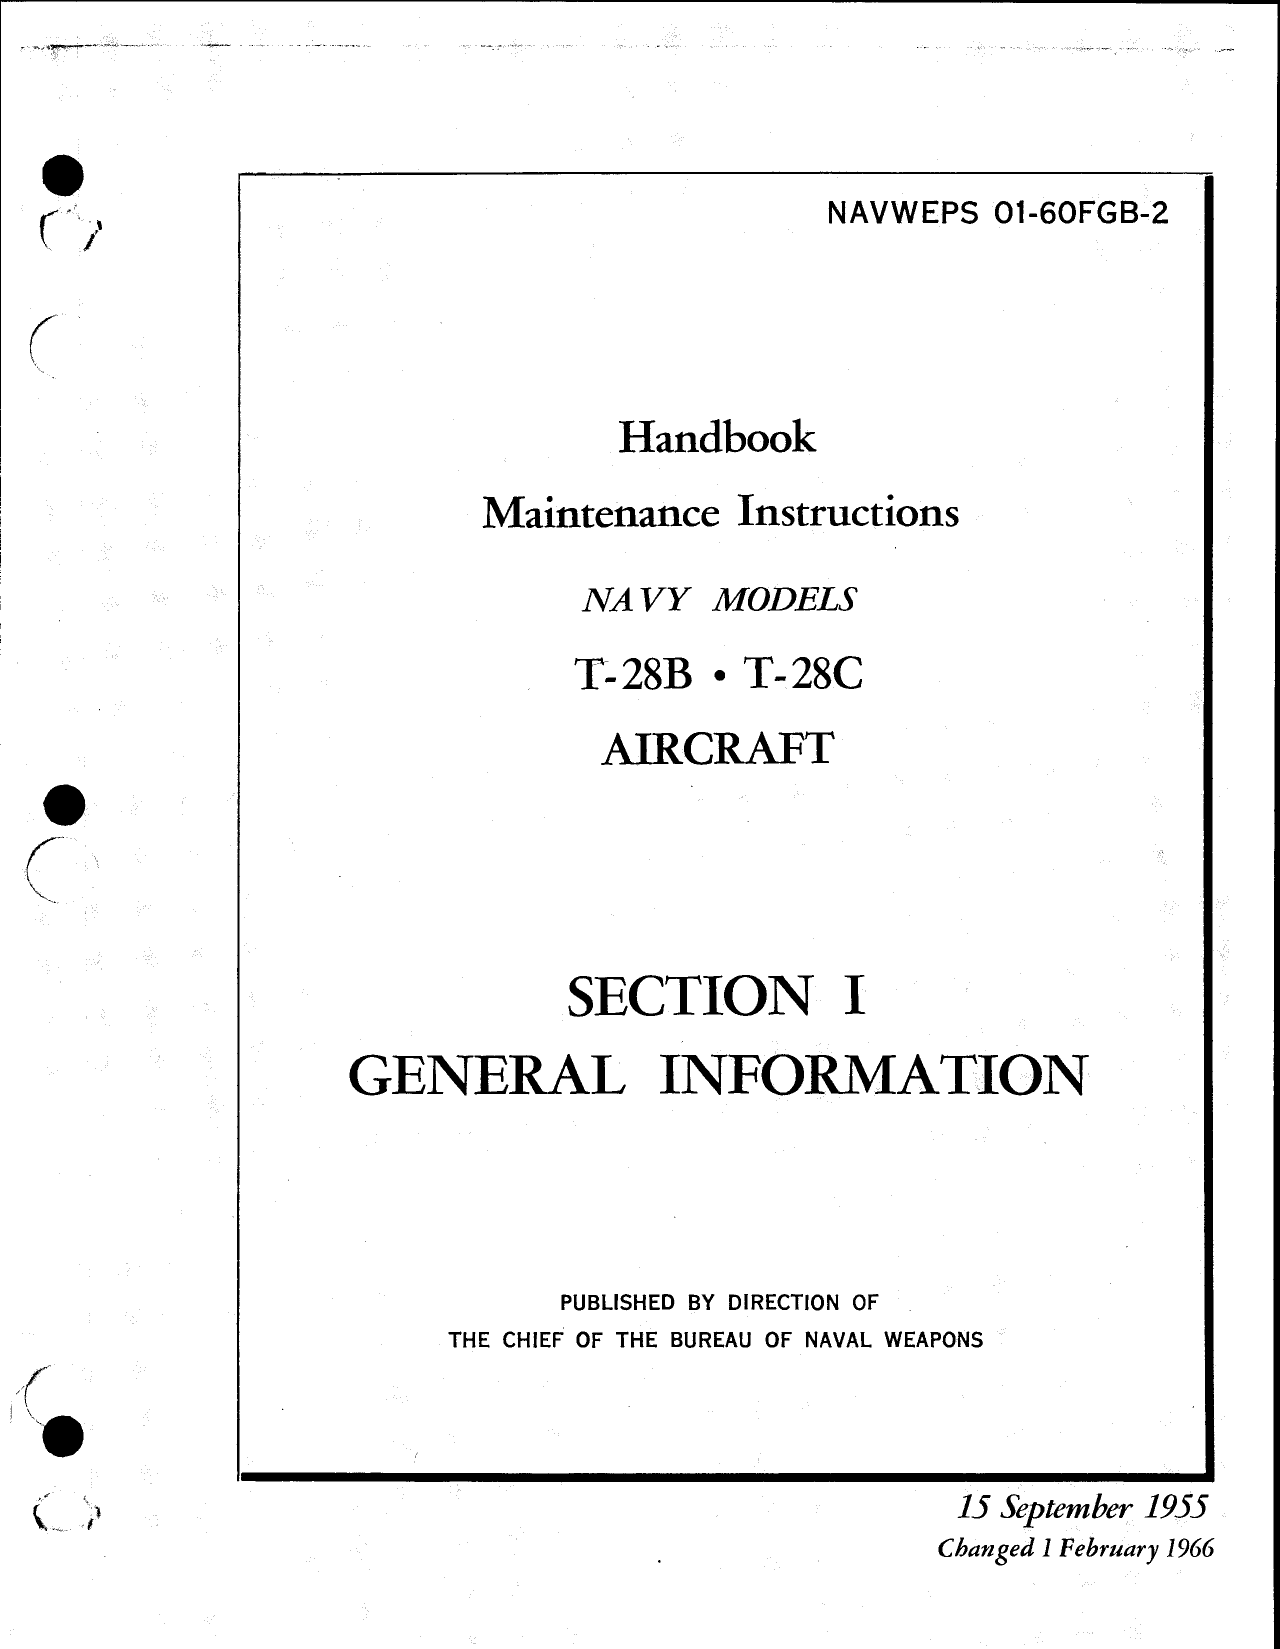 Sample page  9 from AirCorps Library document: Handbook Maintenance Instructions, T-28B T-28C